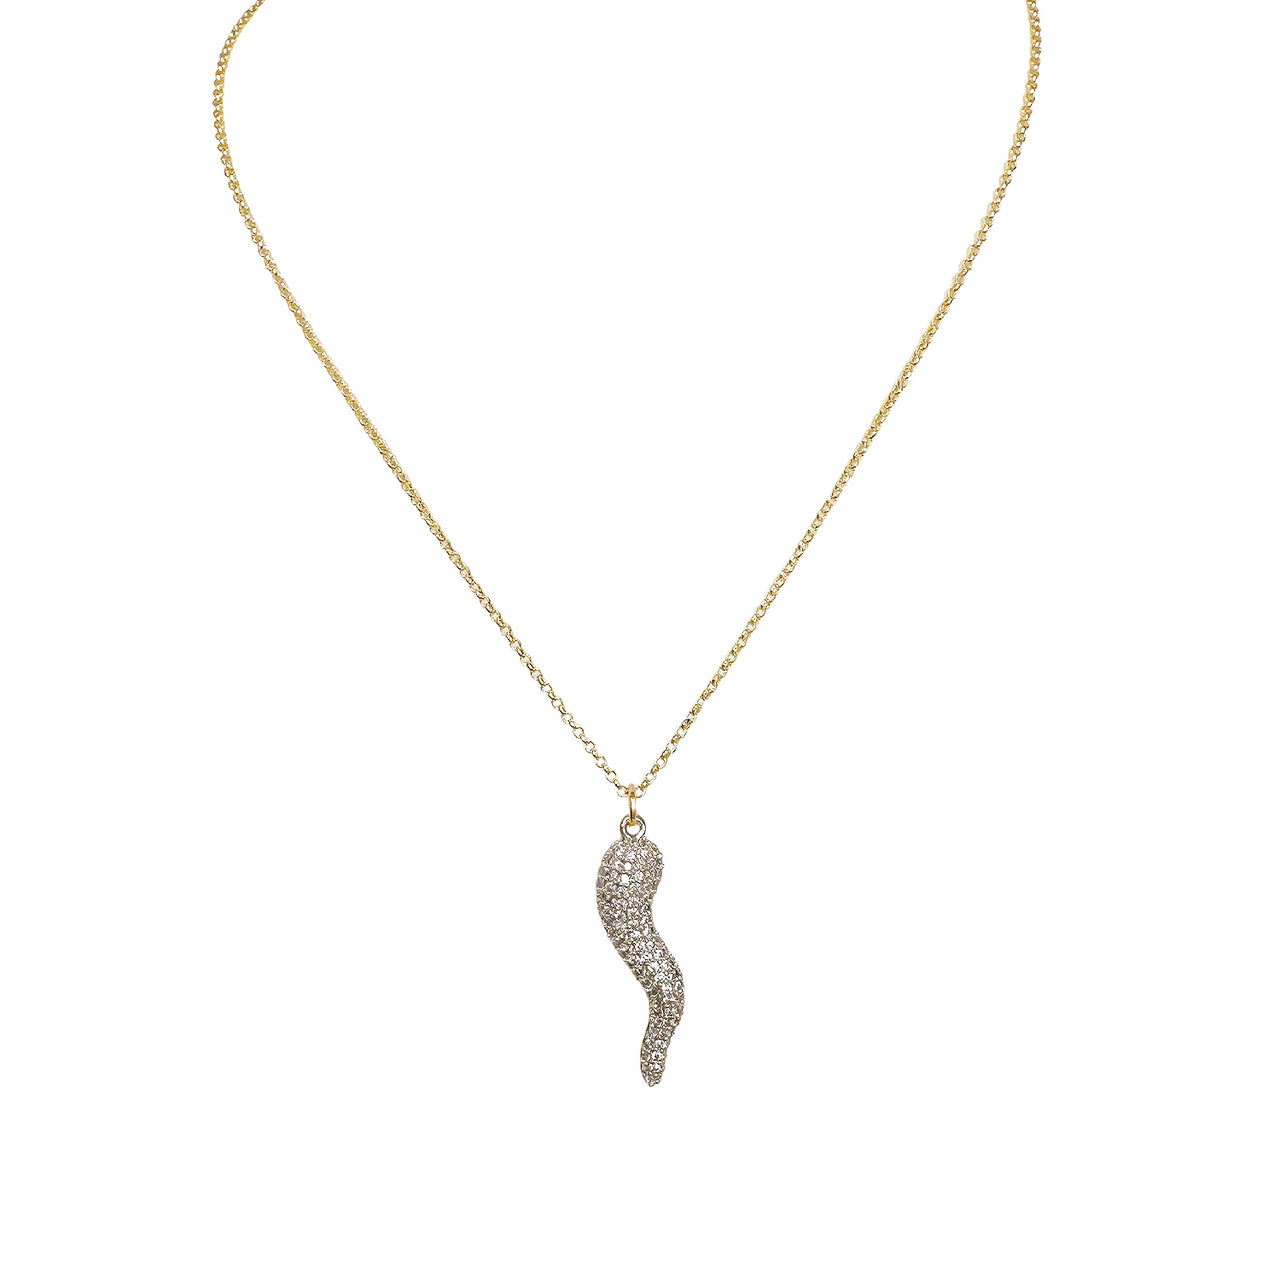 Gia Large Pave Italian Horn Cornicello Necklace